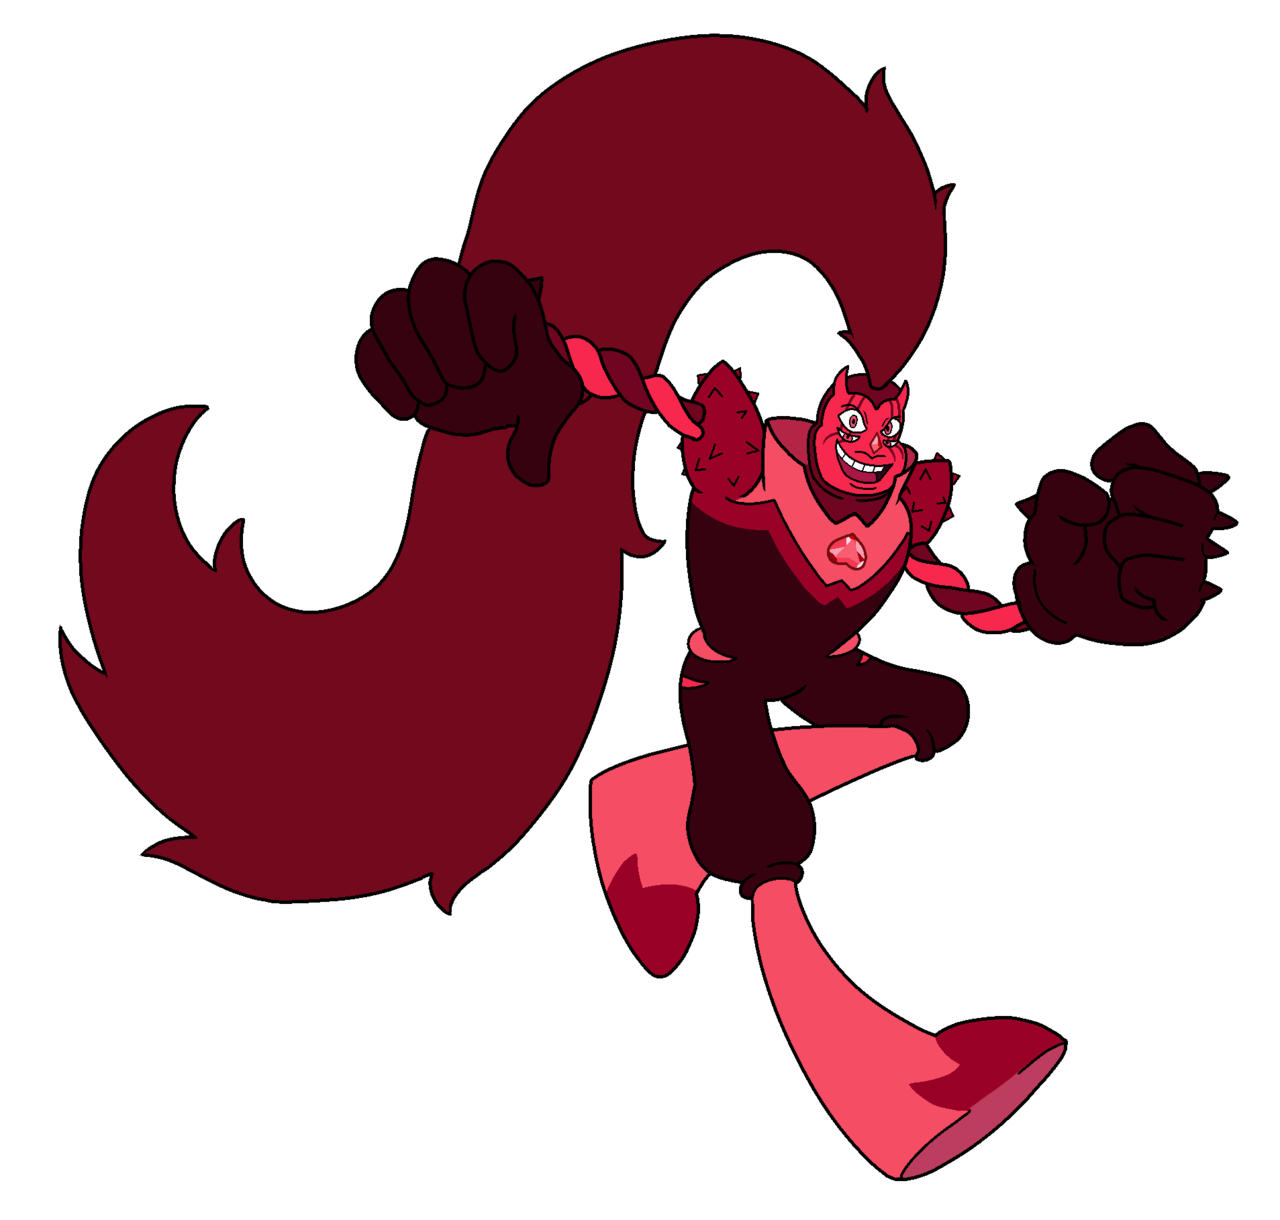 Universe Cartoon Spinel Steven HD Image Free PNG Image